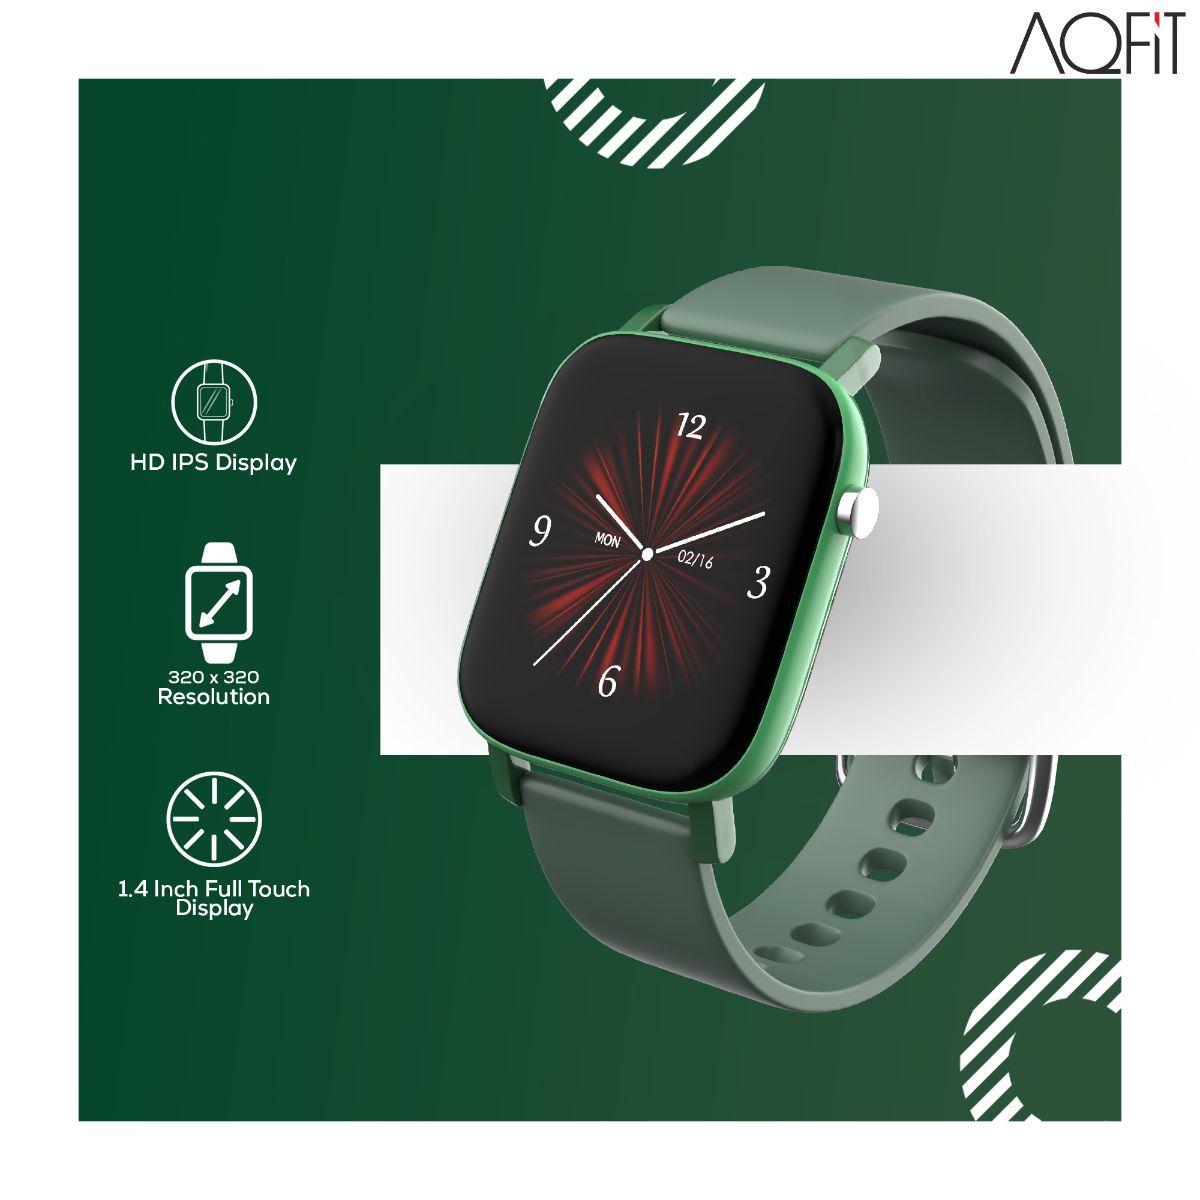 AQfit W5 Edge smartwatch launched for Rs 2499